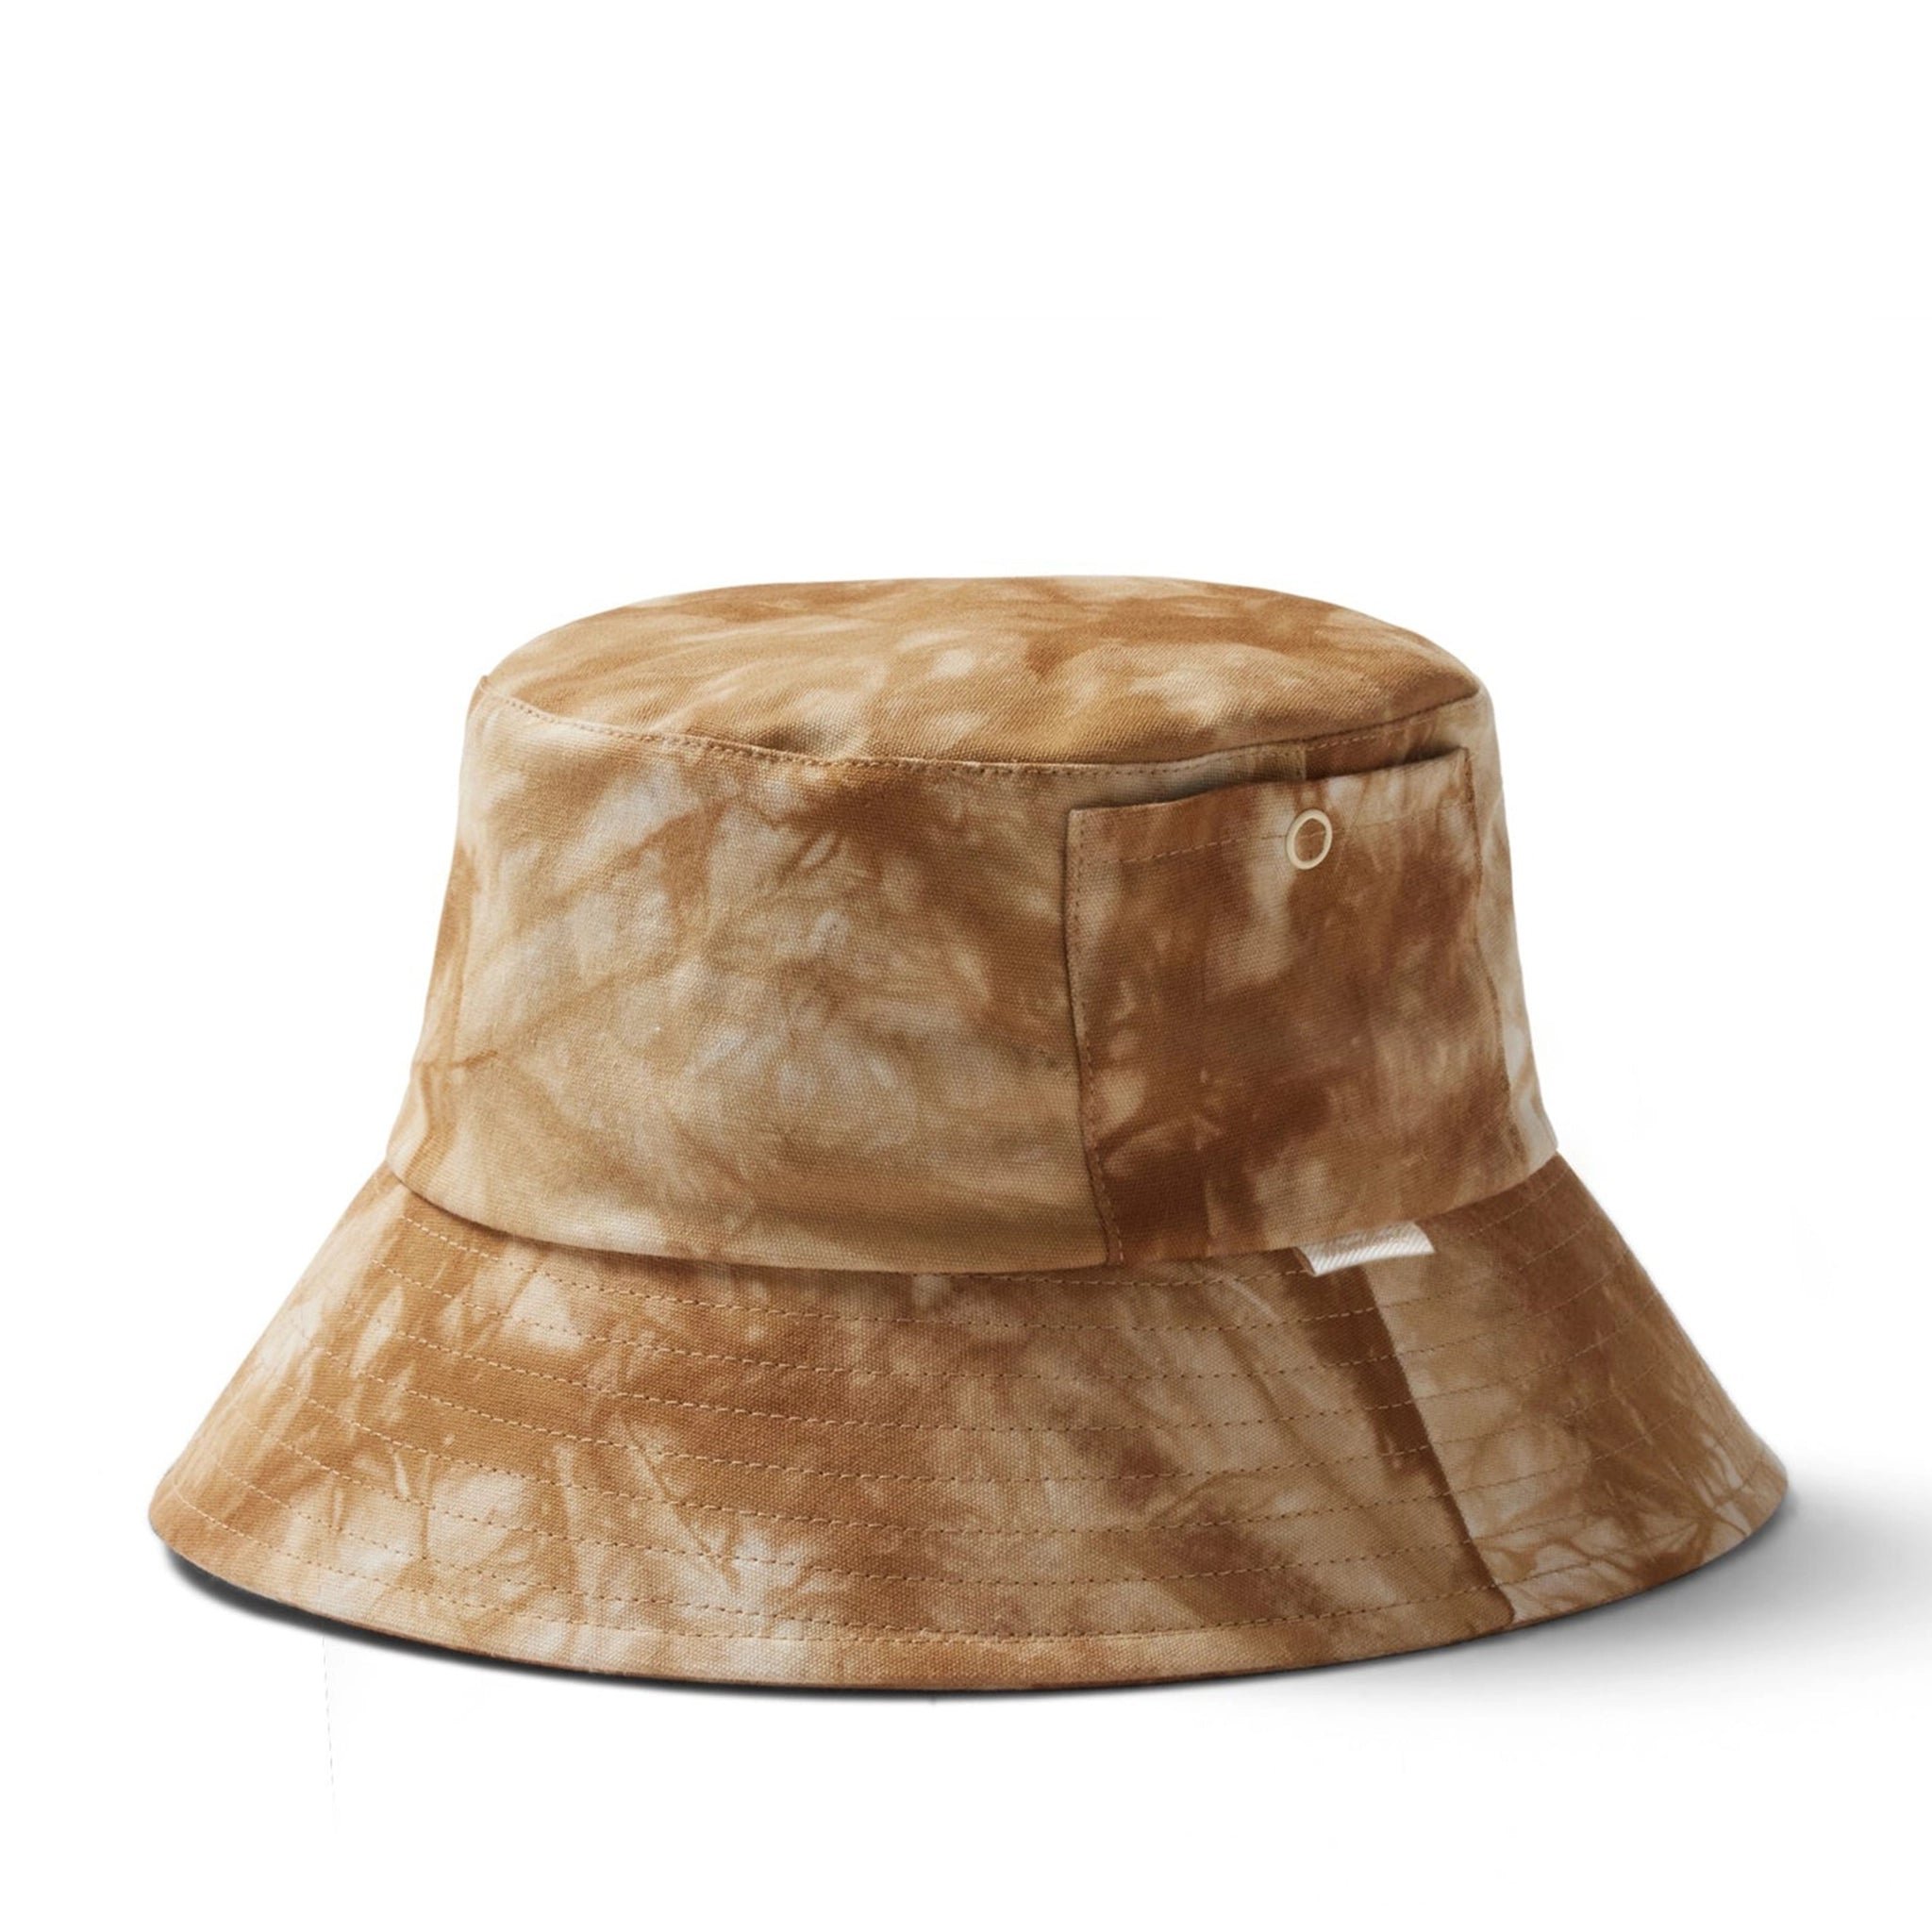 An ivory and tan tie dye bucket hat.